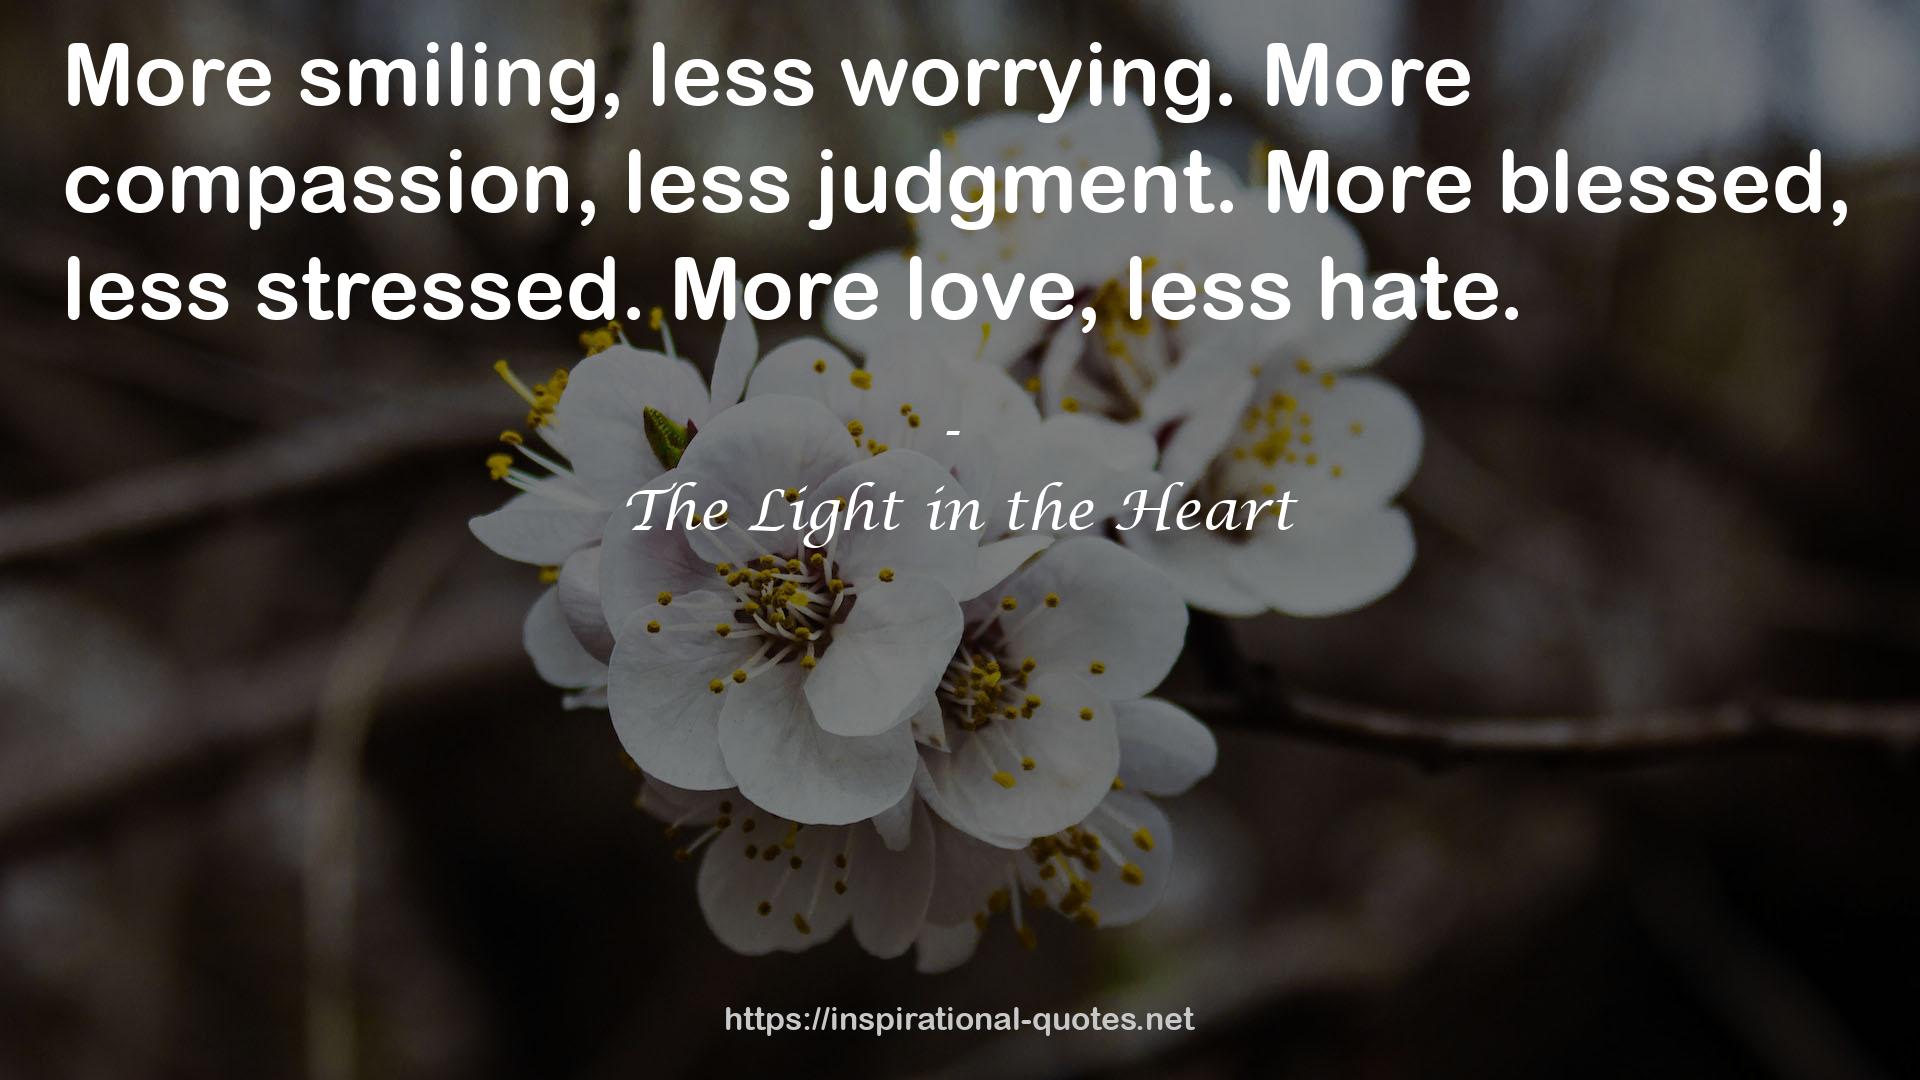 The Light in the Heart QUOTES